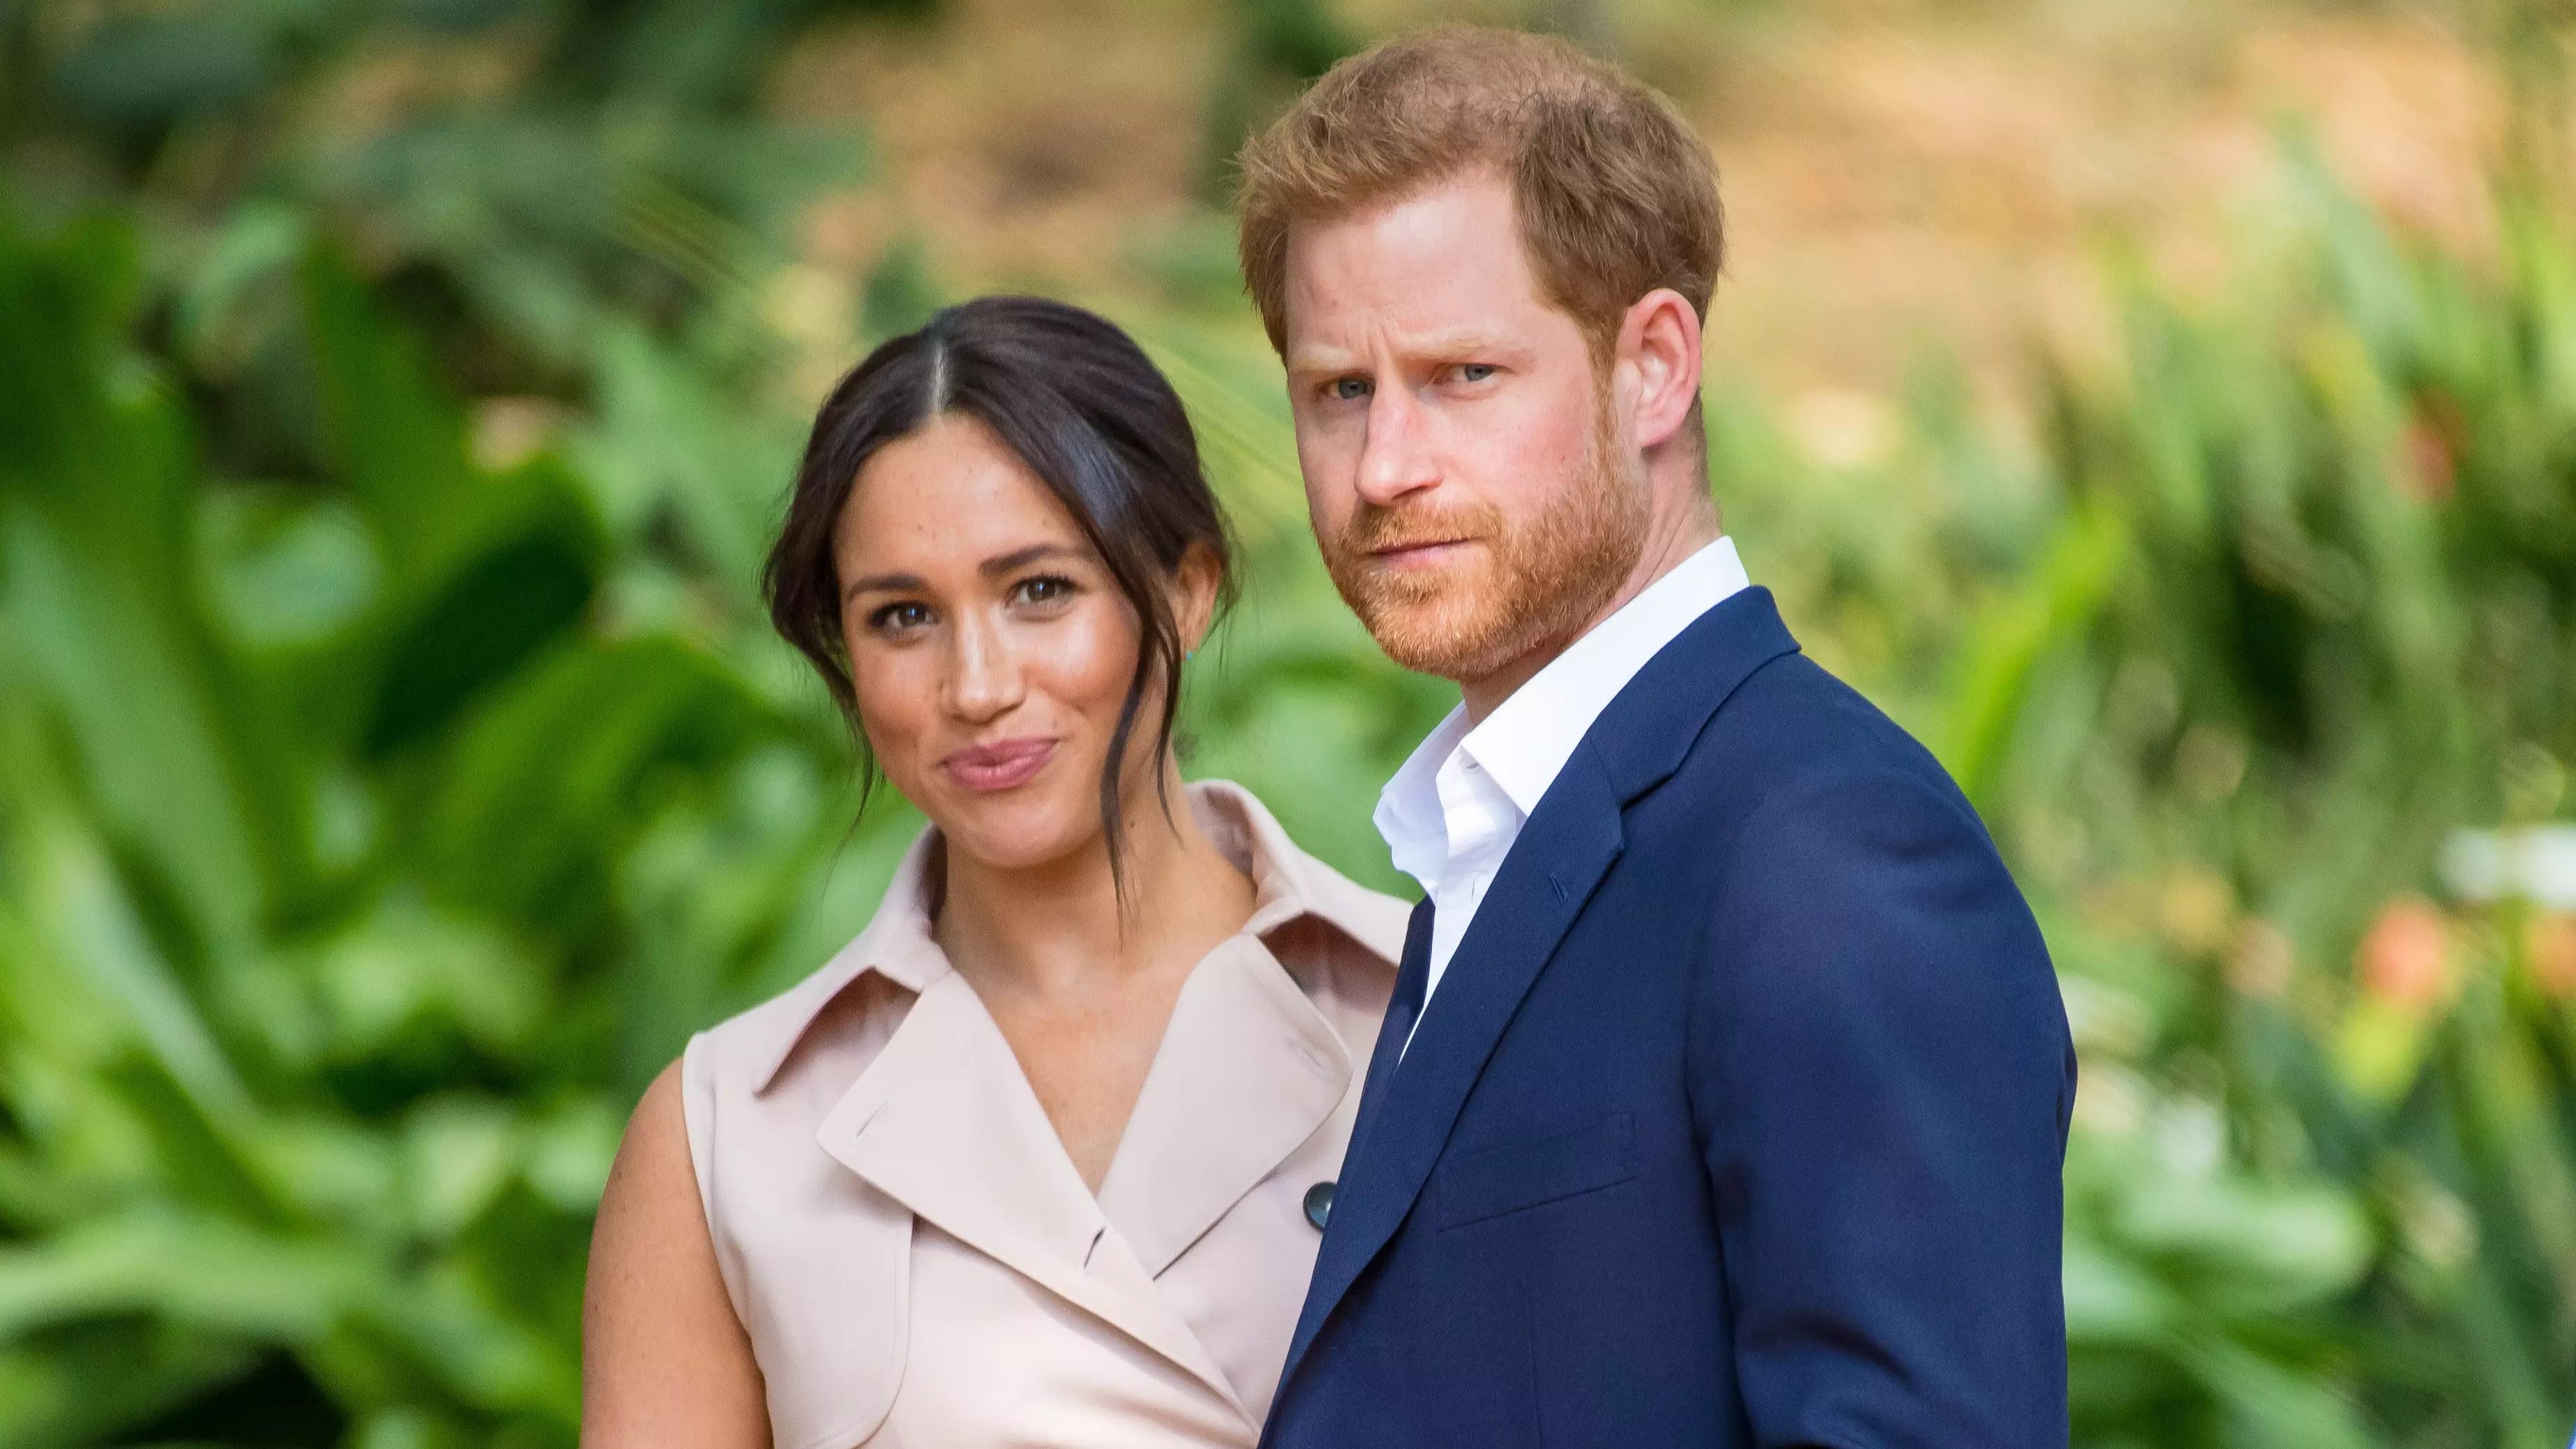 Prince Harry And Meghan Markle Move Down Listings On Royal Family Website